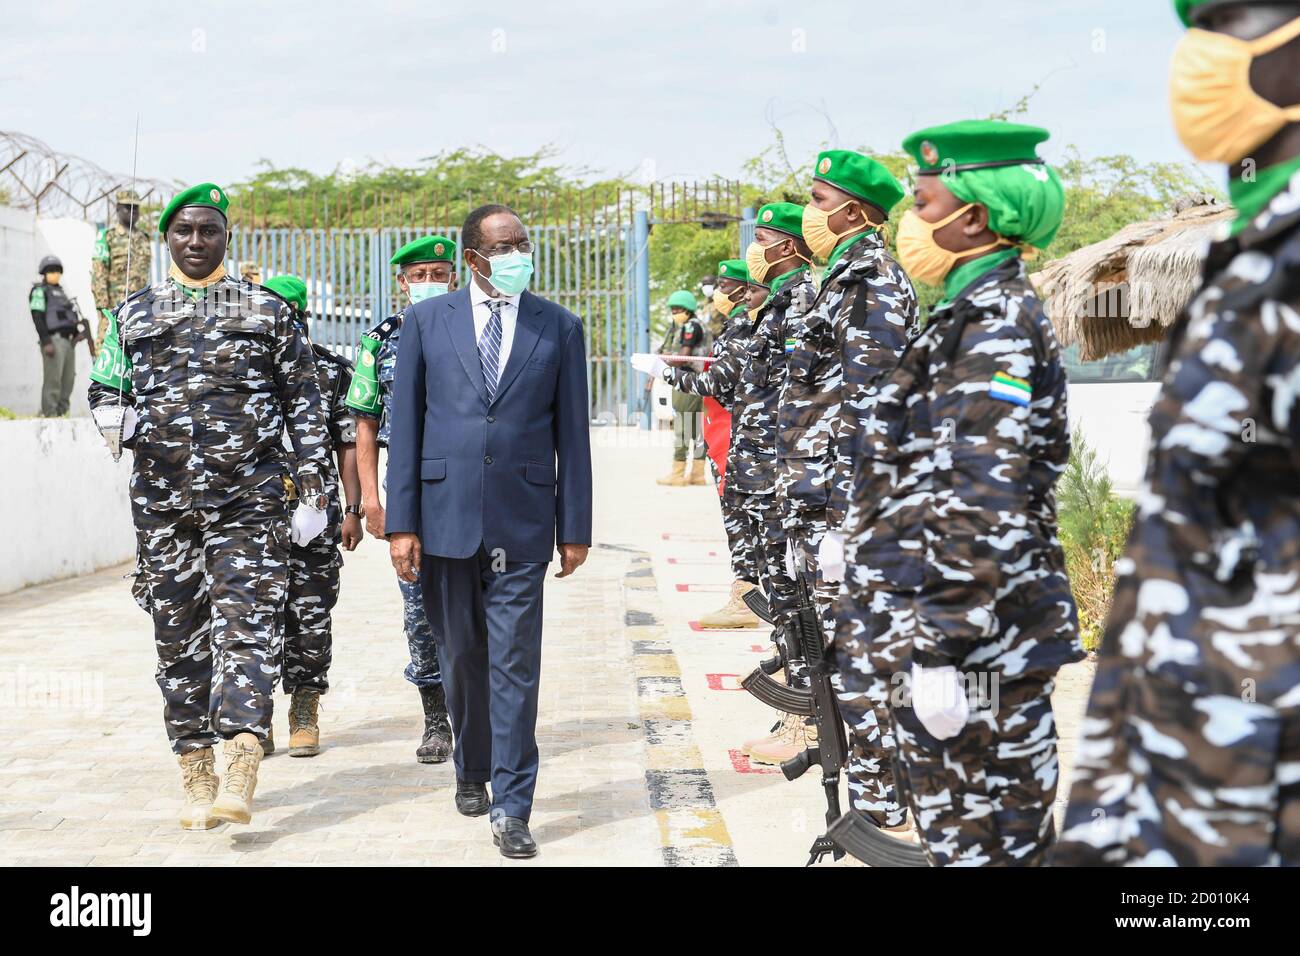 Ambassador Francisco Madeira, the Special Representative of the Chairperson of the African Union Commission (SRCC) for Somalia inspects a parade mounted by officers of the Sierra Leone Formed Police Unit, serving under the African Union Mission in Somalia (AMISOM), during a medal parade held in Mogadishu, Somalia on 6 September 2020. Stock Photo